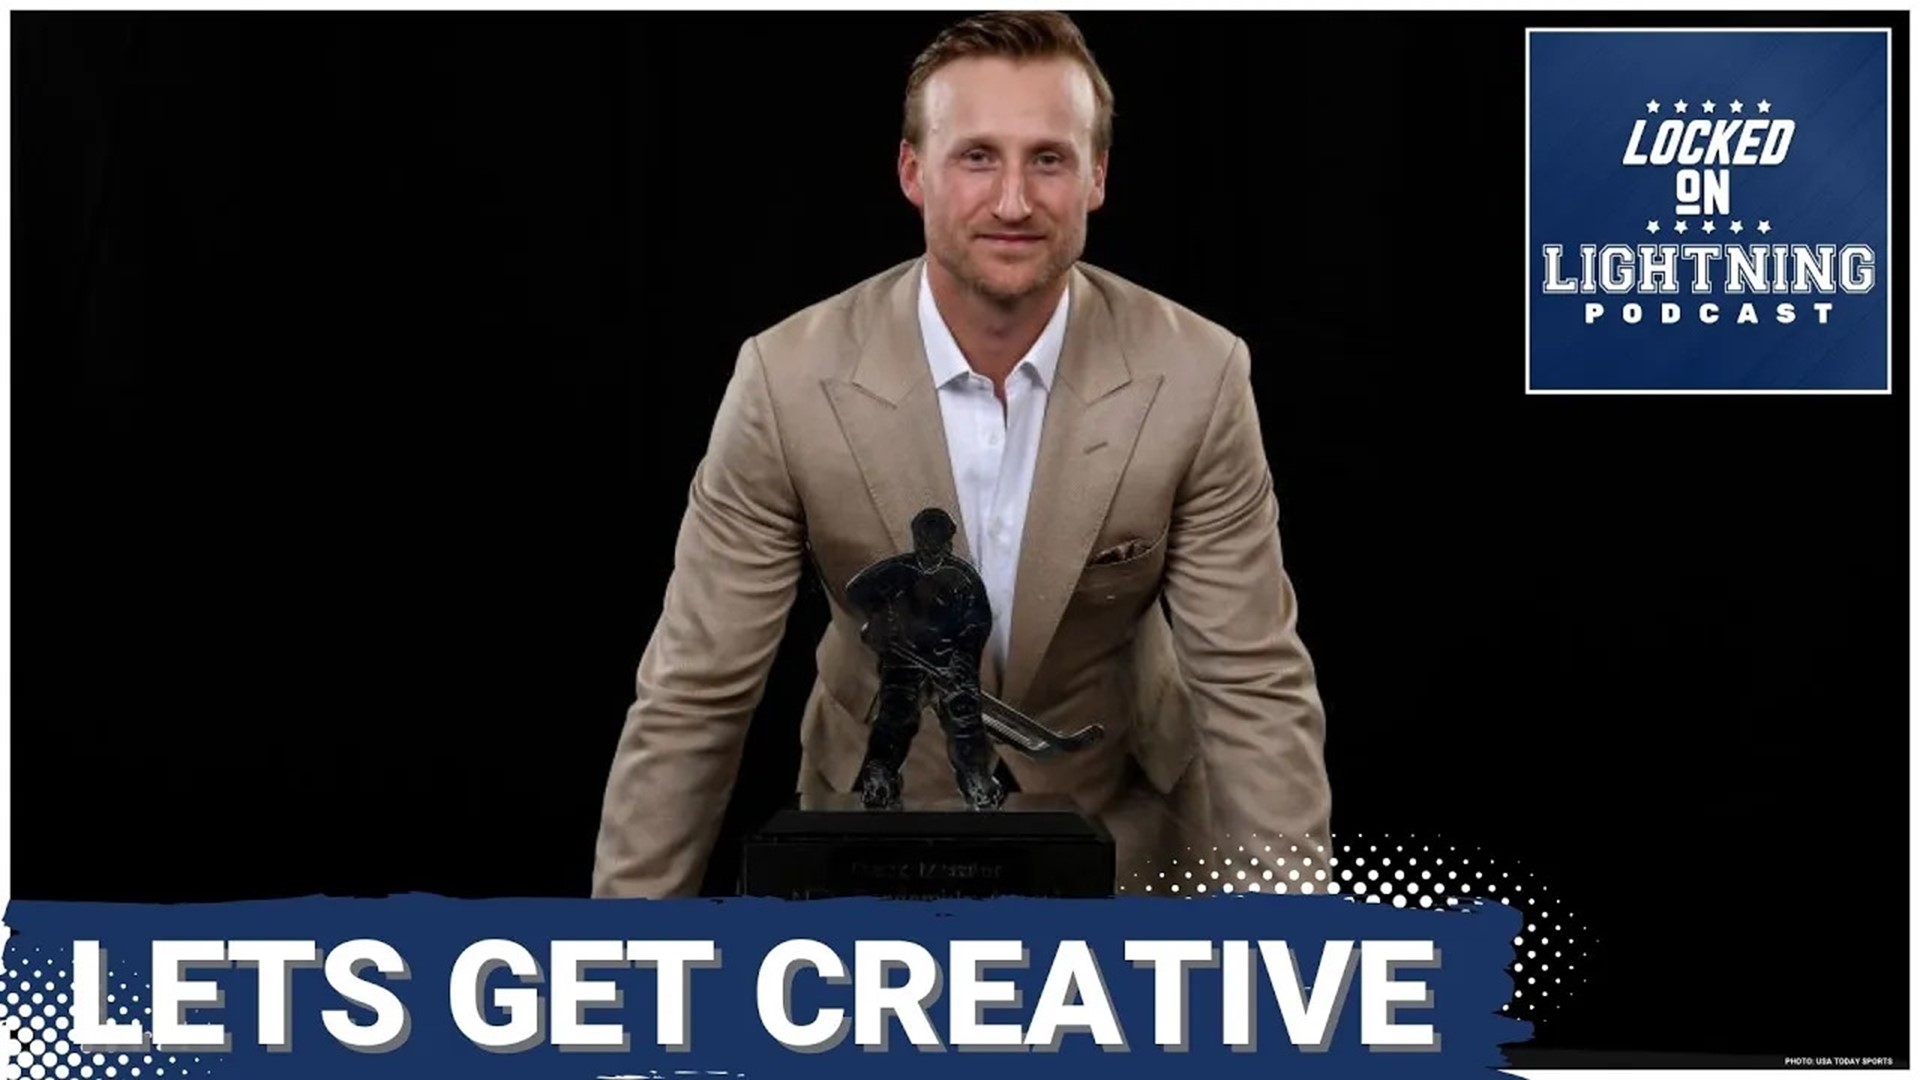 Can an old dog learn new tricks? On today's episode, we examine what Bolts captain Steven Stamkos can do to inject some life into his game.